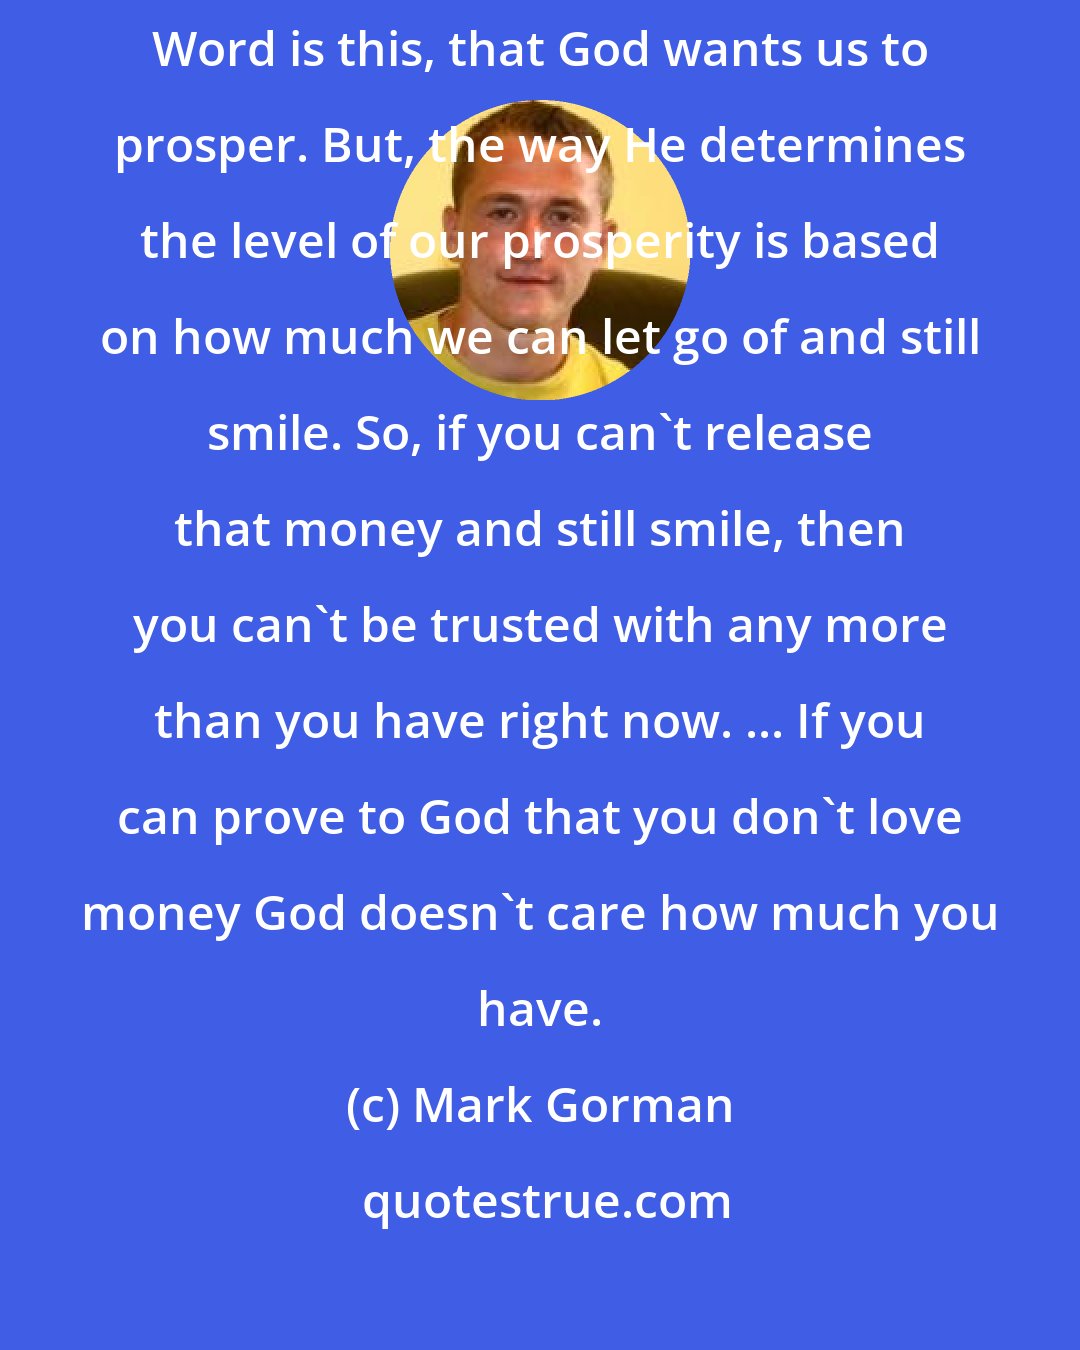 Mark Gorman: One of the things I've learned as I've studied the principles in God's Word is this, that God wants us to prosper. But, the way He determines the level of our prosperity is based on how much we can let go of and still smile. So, if you can't release that money and still smile, then you can't be trusted with any more than you have right now. ... If you can prove to God that you don't love money God doesn't care how much you have.